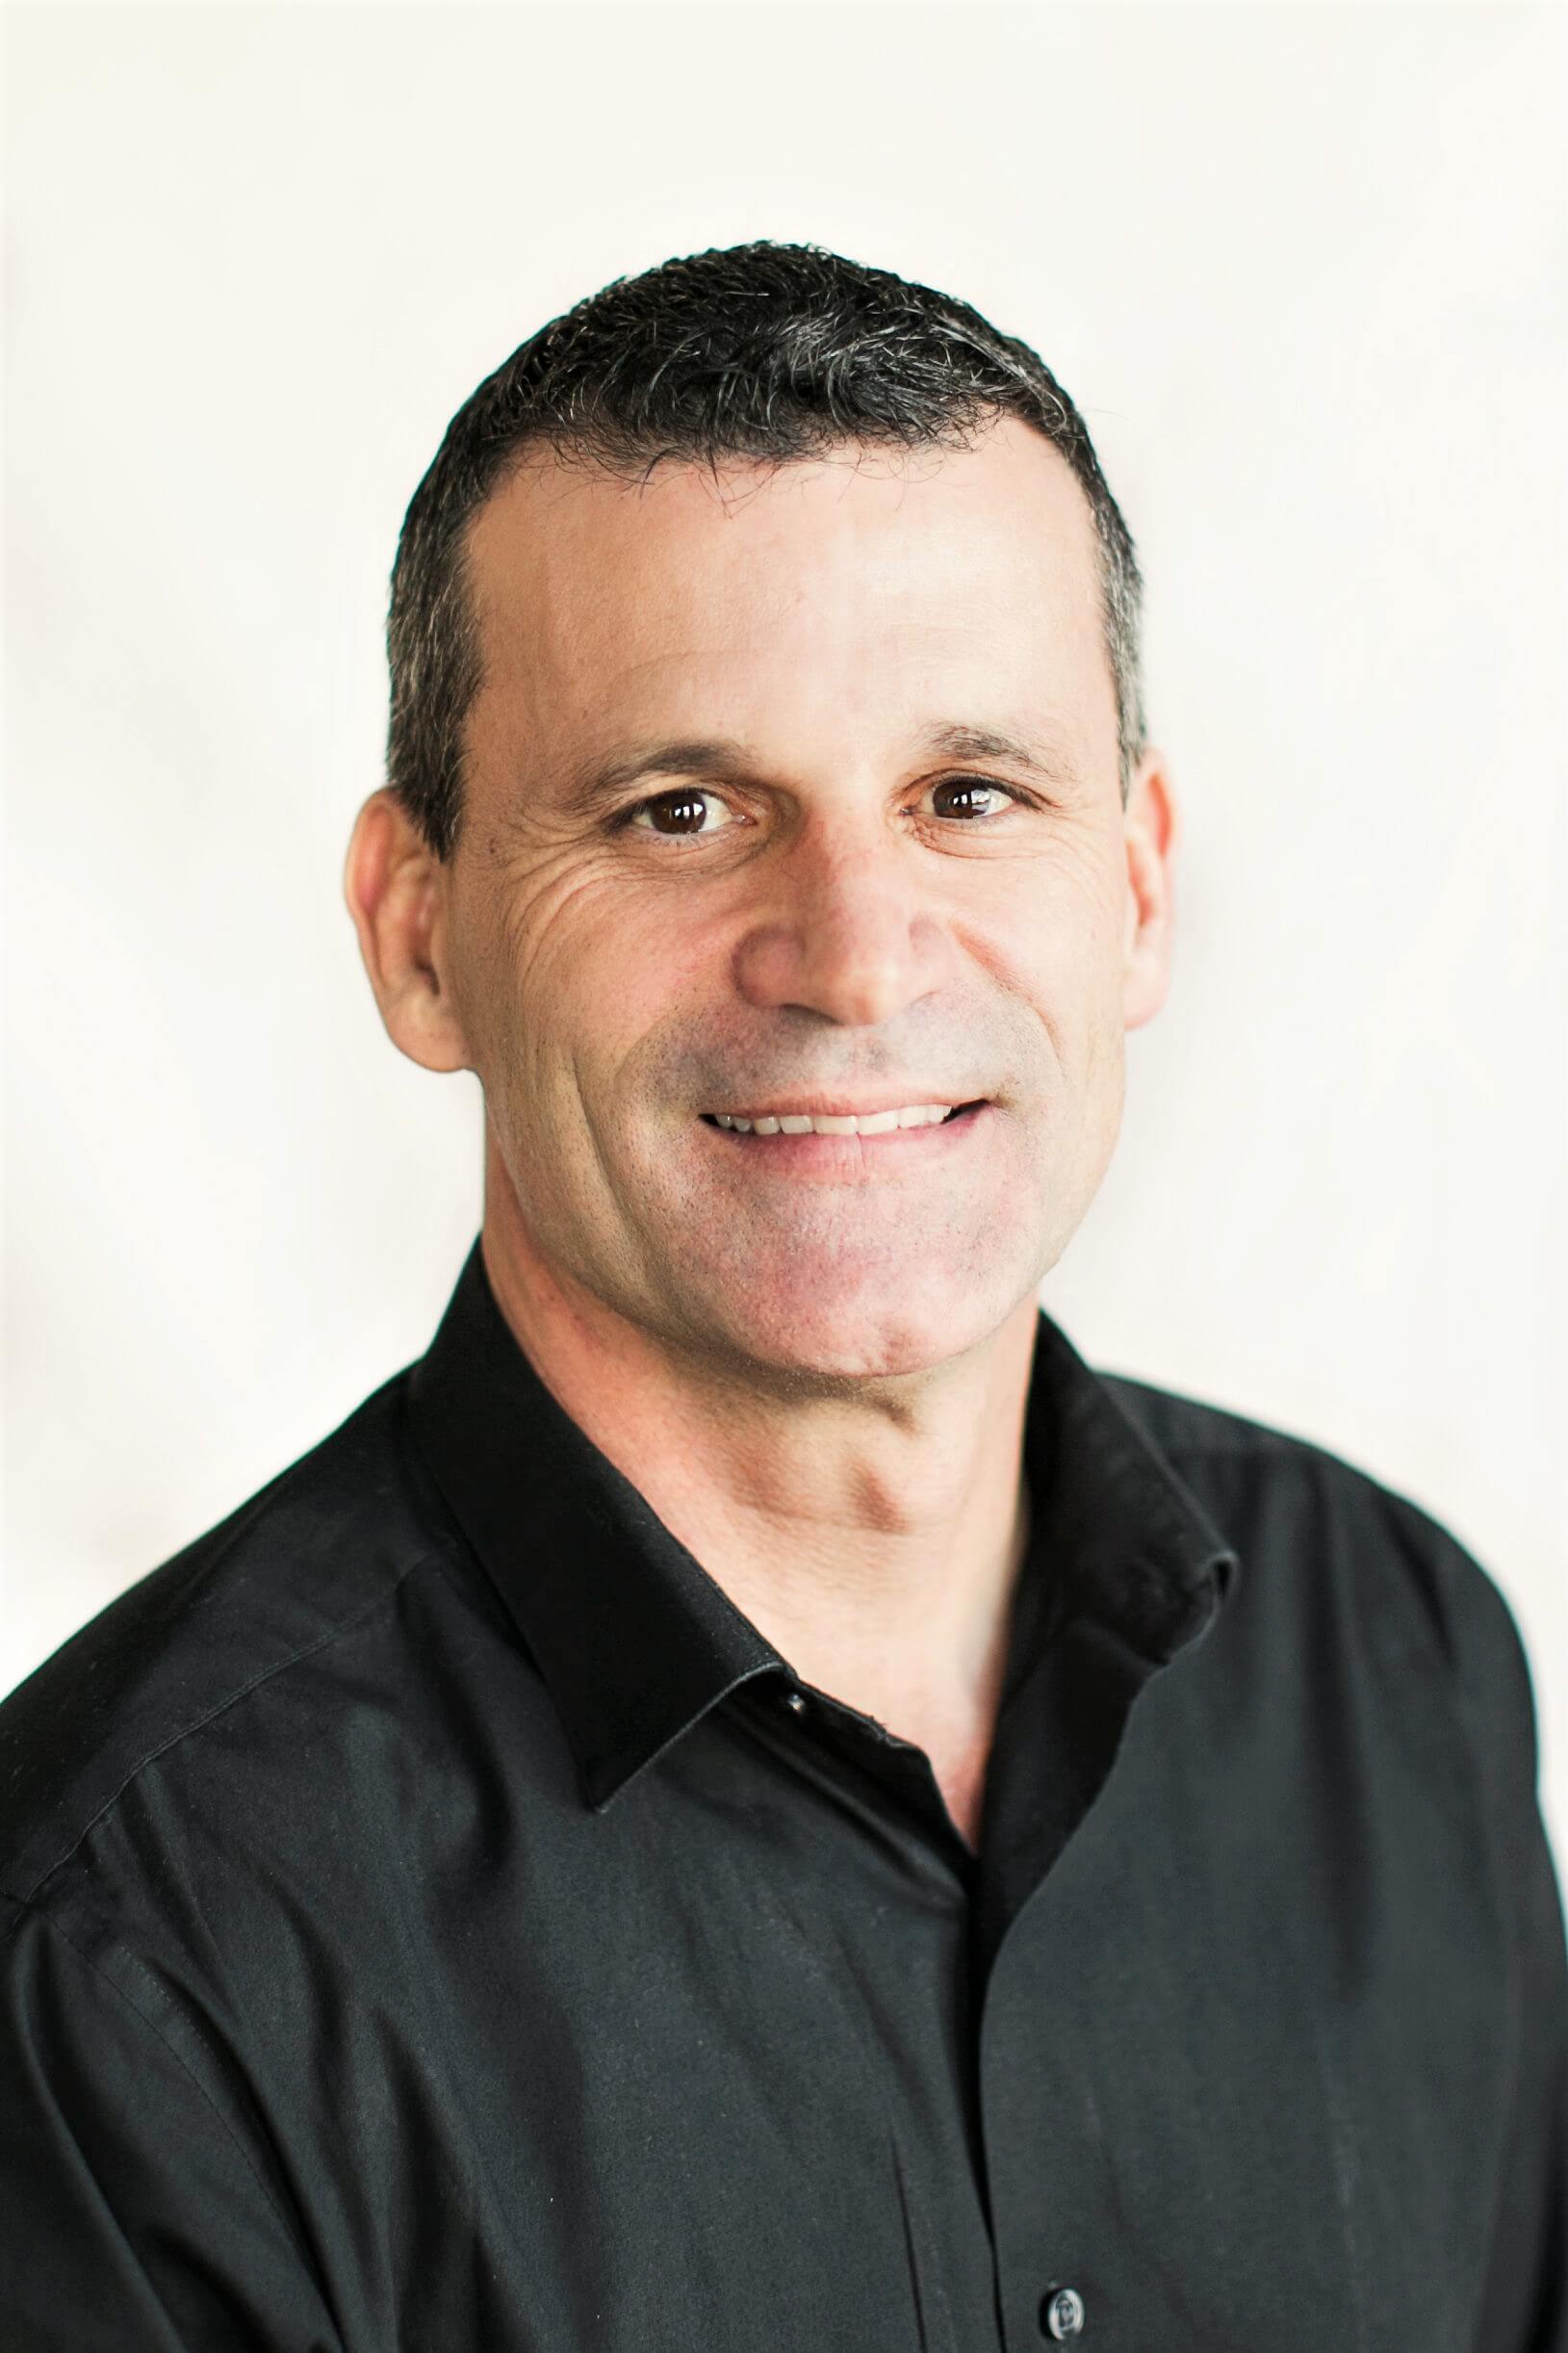 A headshot of Nick Greenwell, the owner of Burley Physical Therapy